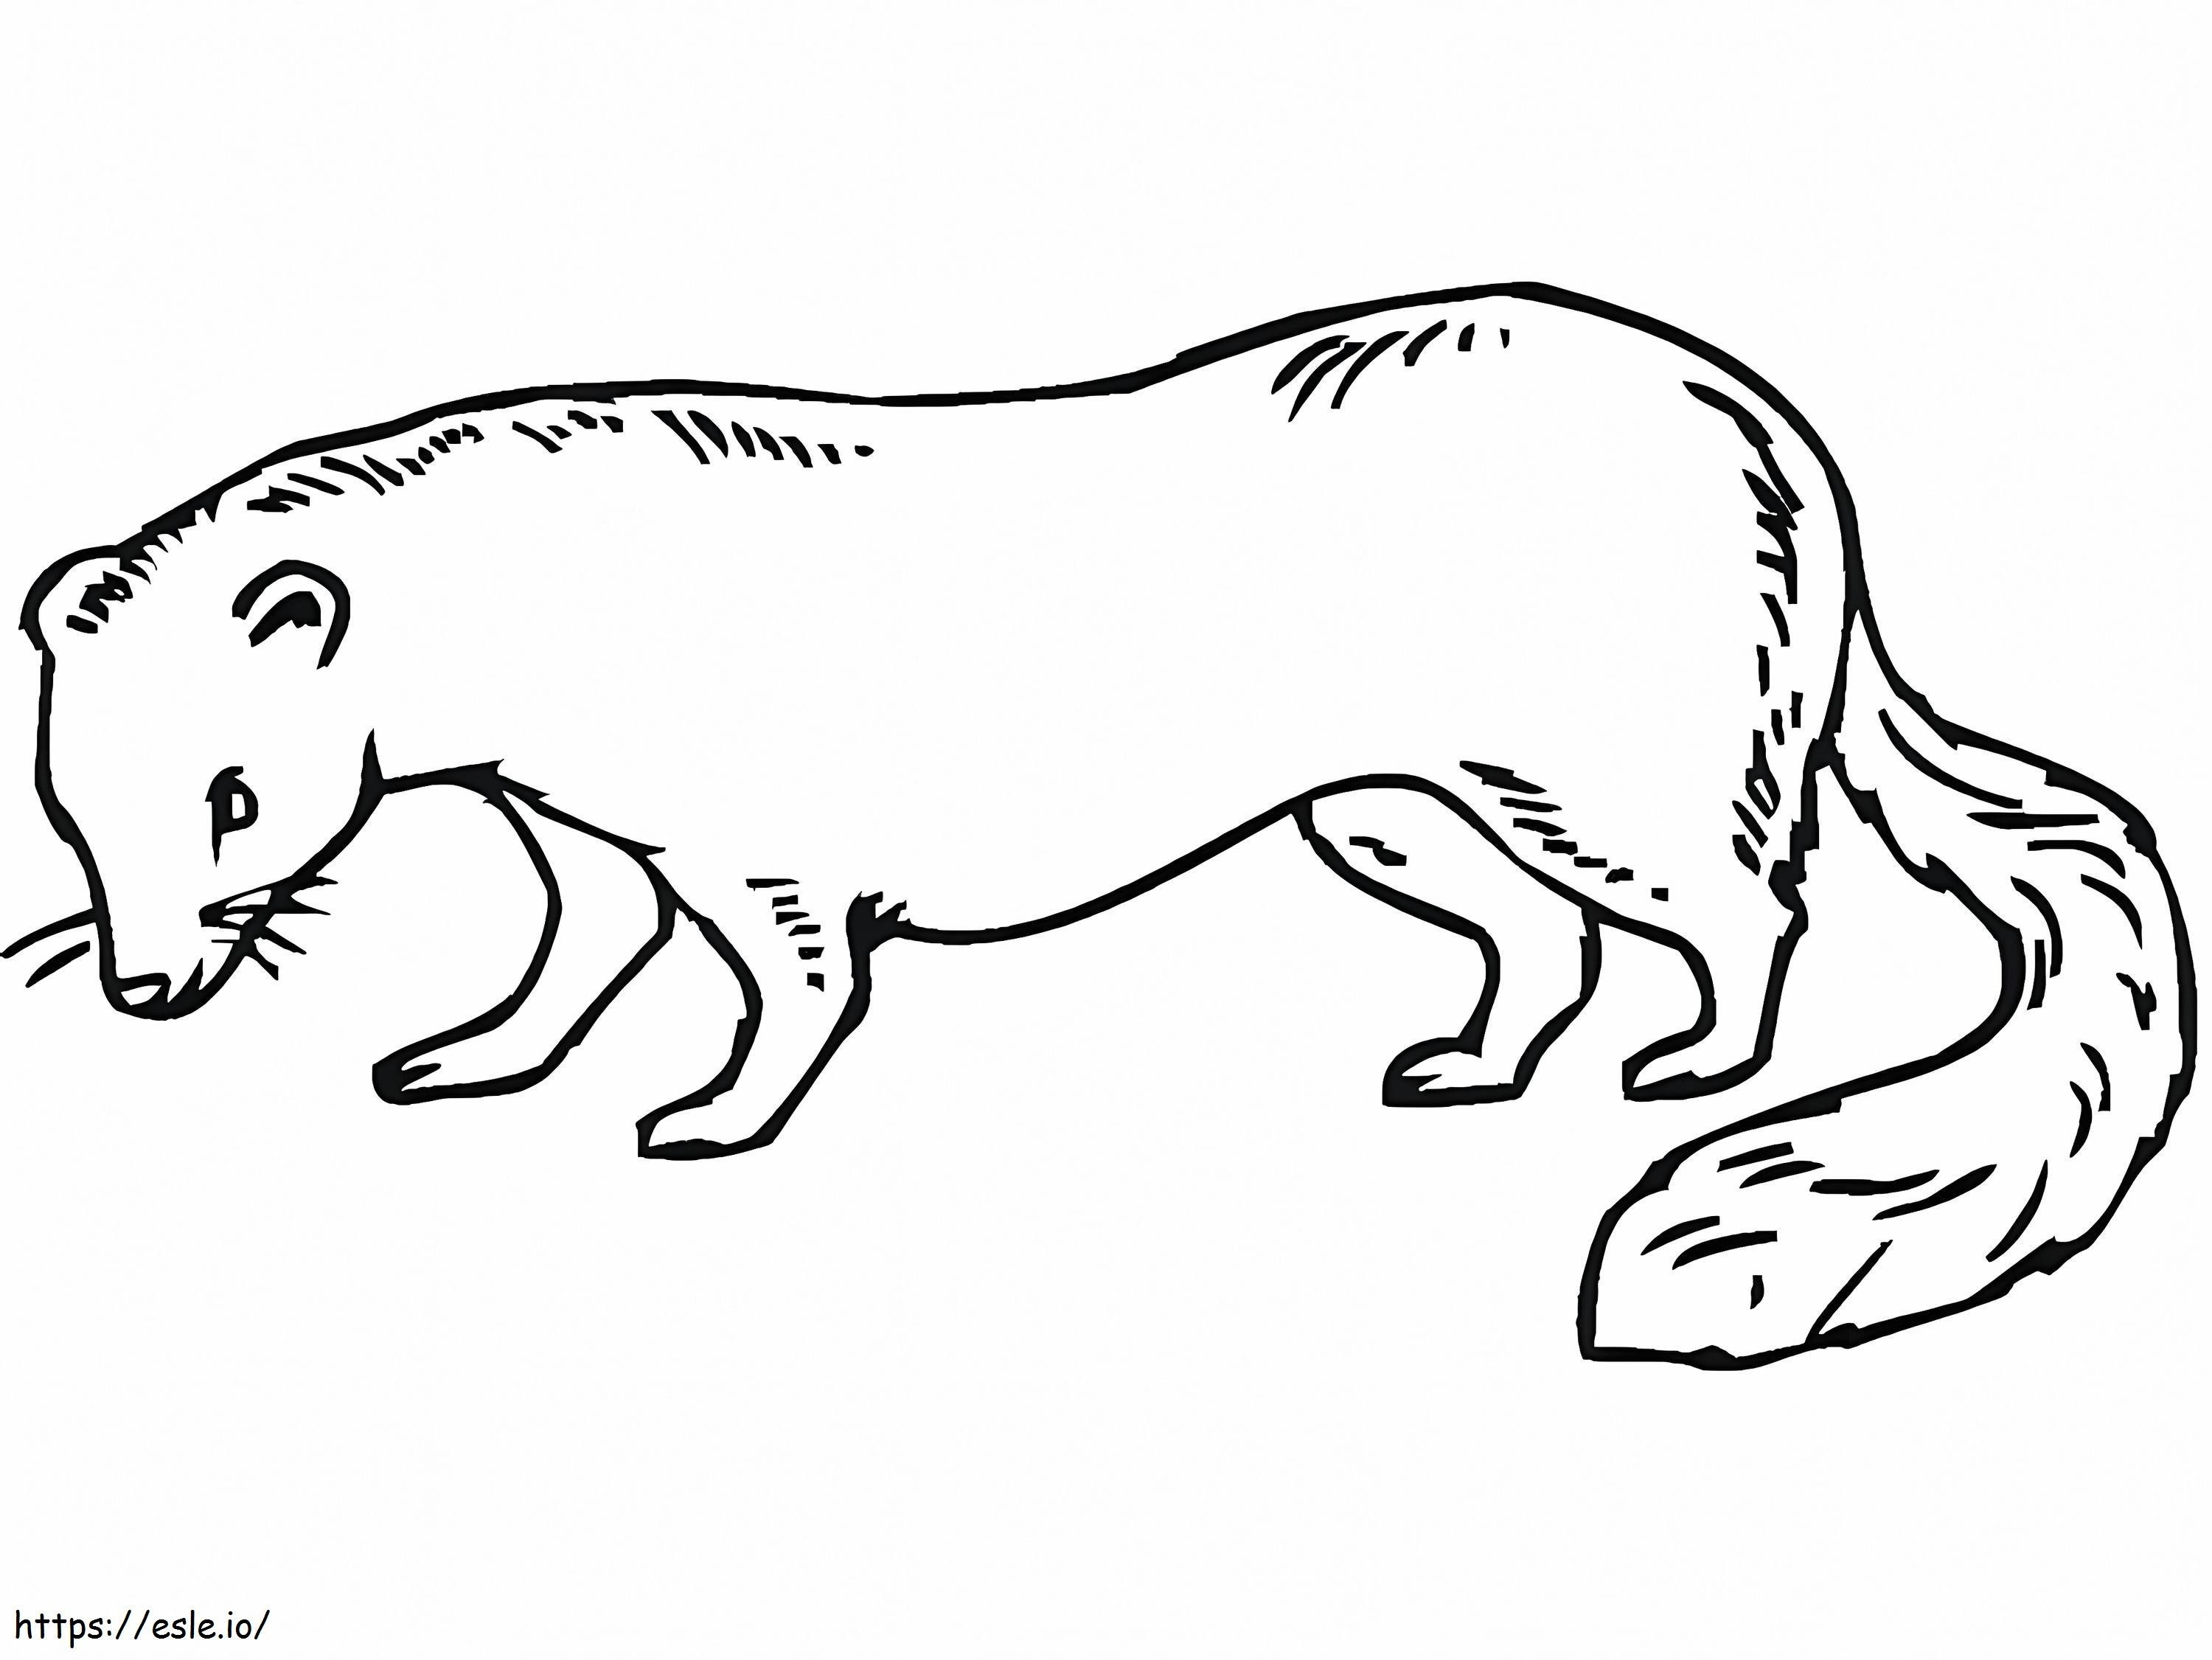 Ferret 1 coloring page